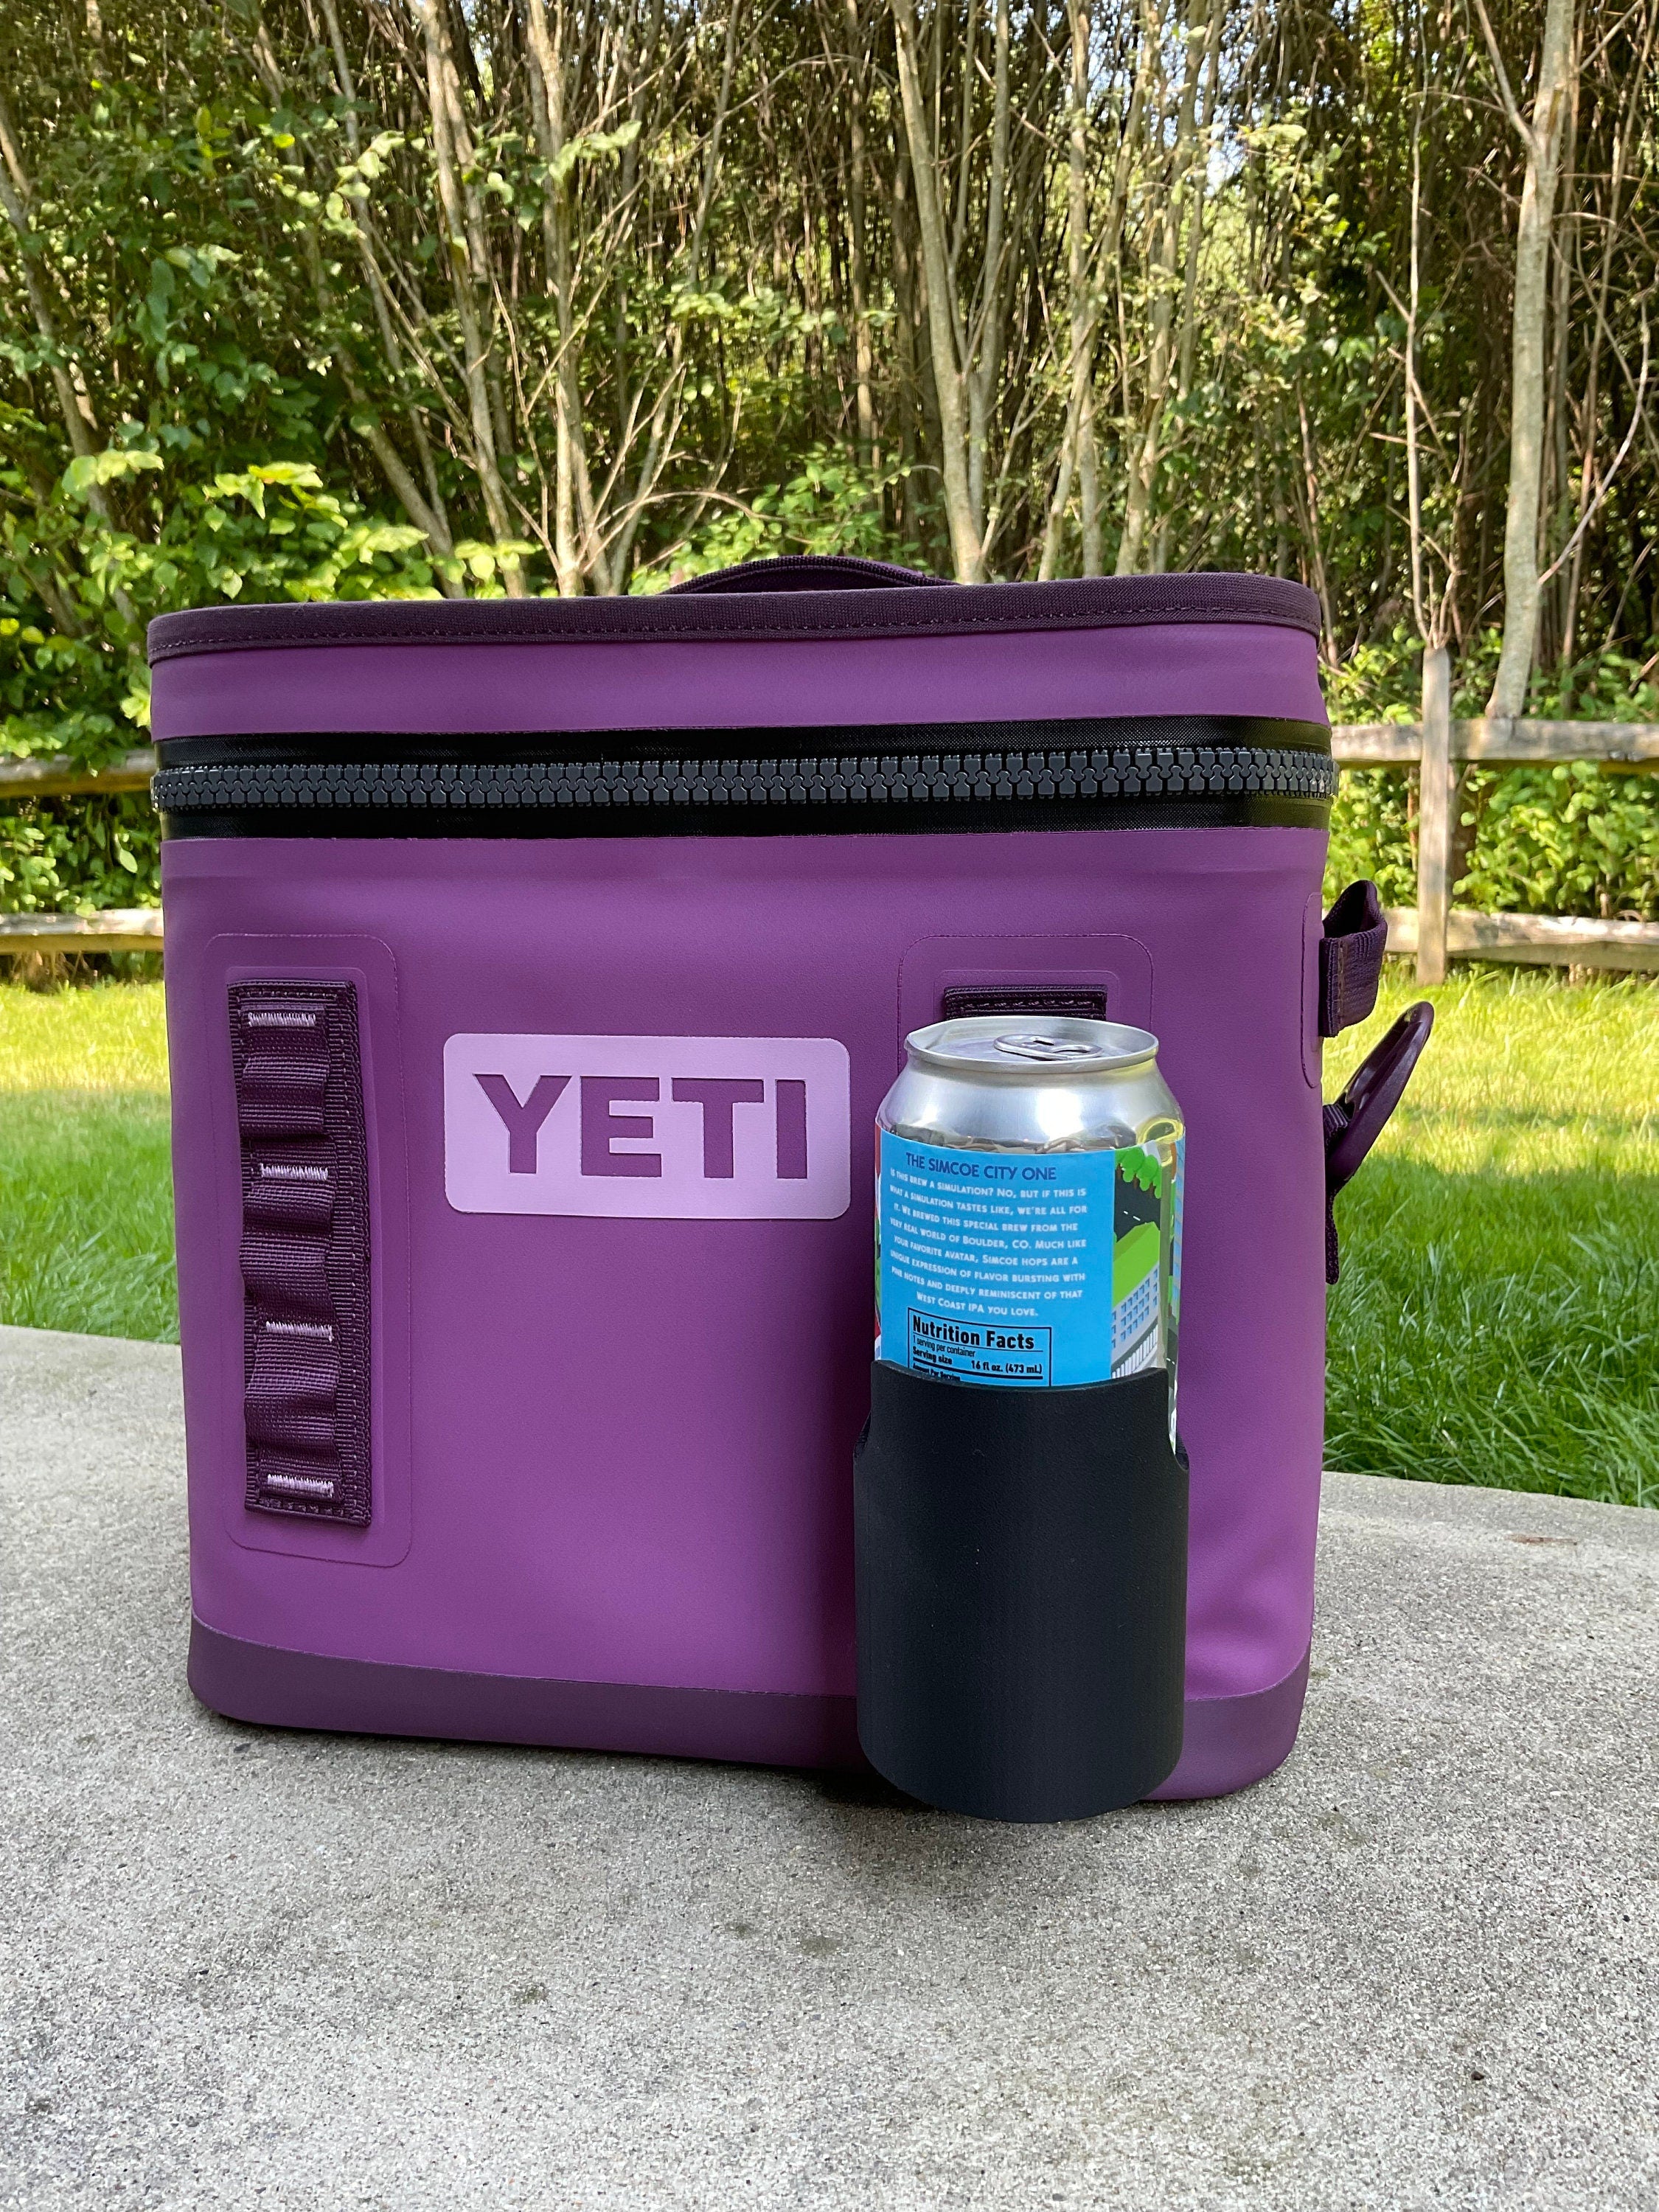 Yeti Soft Cooler Cup Holder, Yeti Cup Holder, Soft cooler cup holder, Cooler Cup holder, Soft cooler accessories,Yeti Carry all cup holder